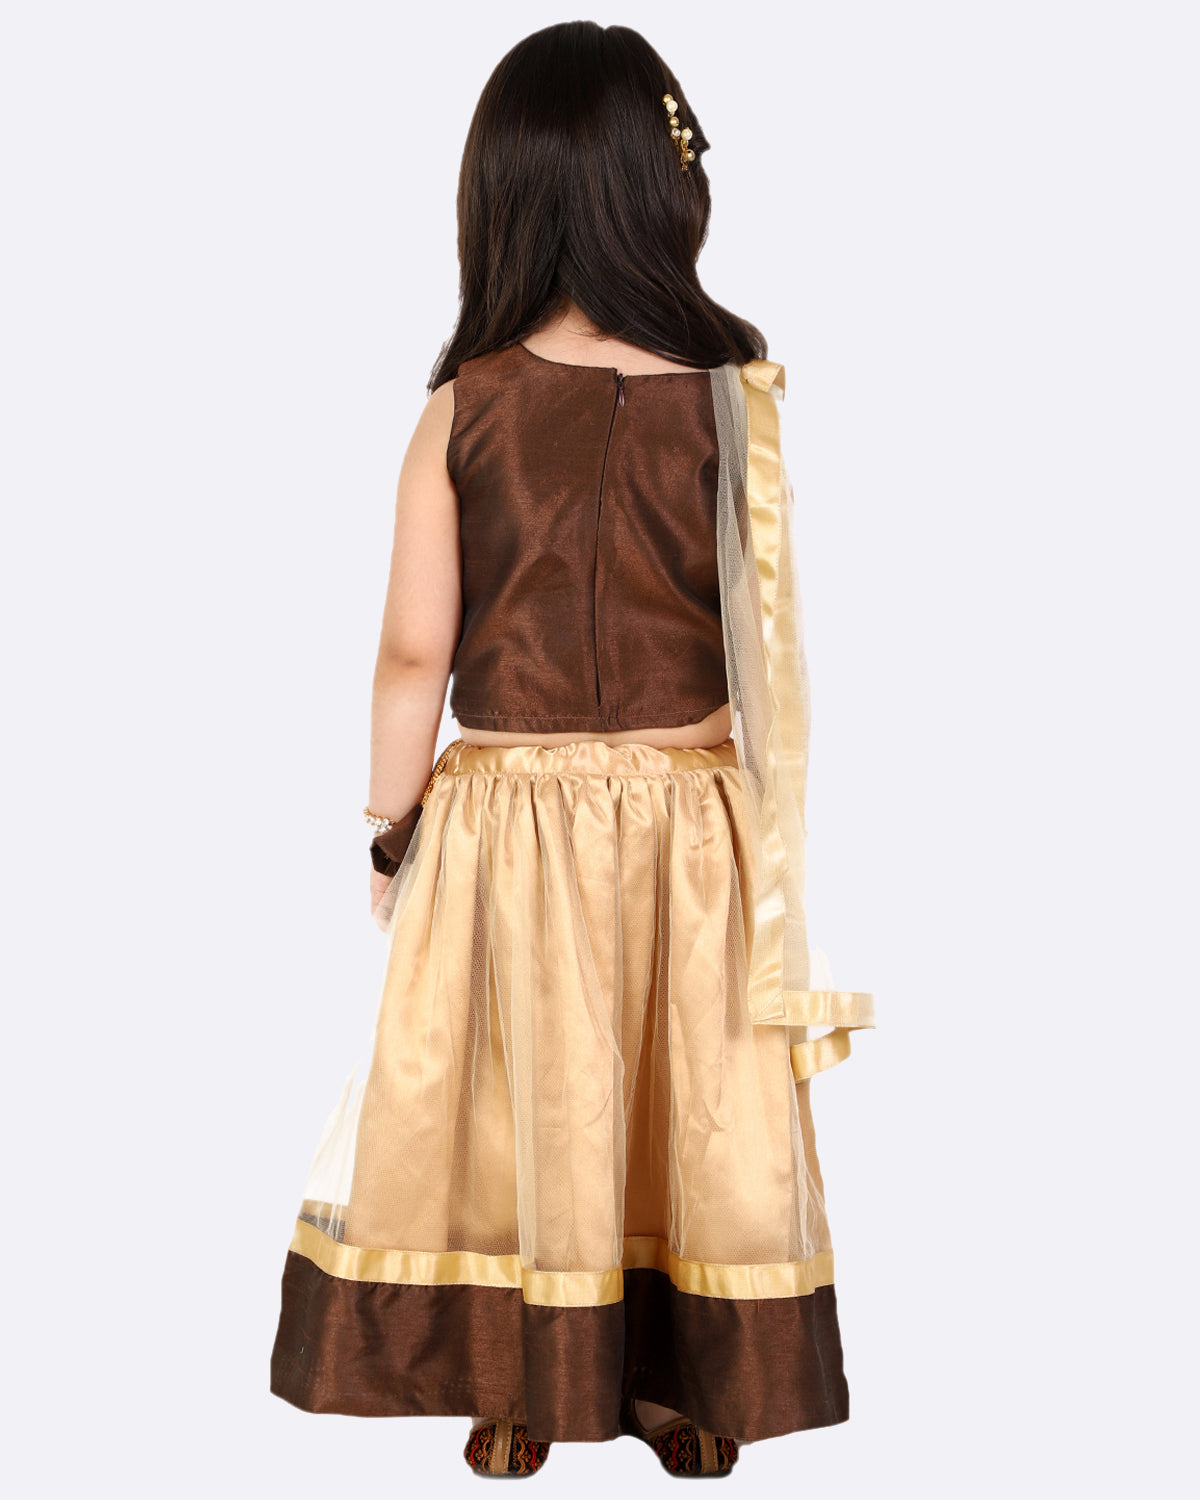 Girls Patch Embroidered Lehnga Choli Set With Dupatta (Brown)